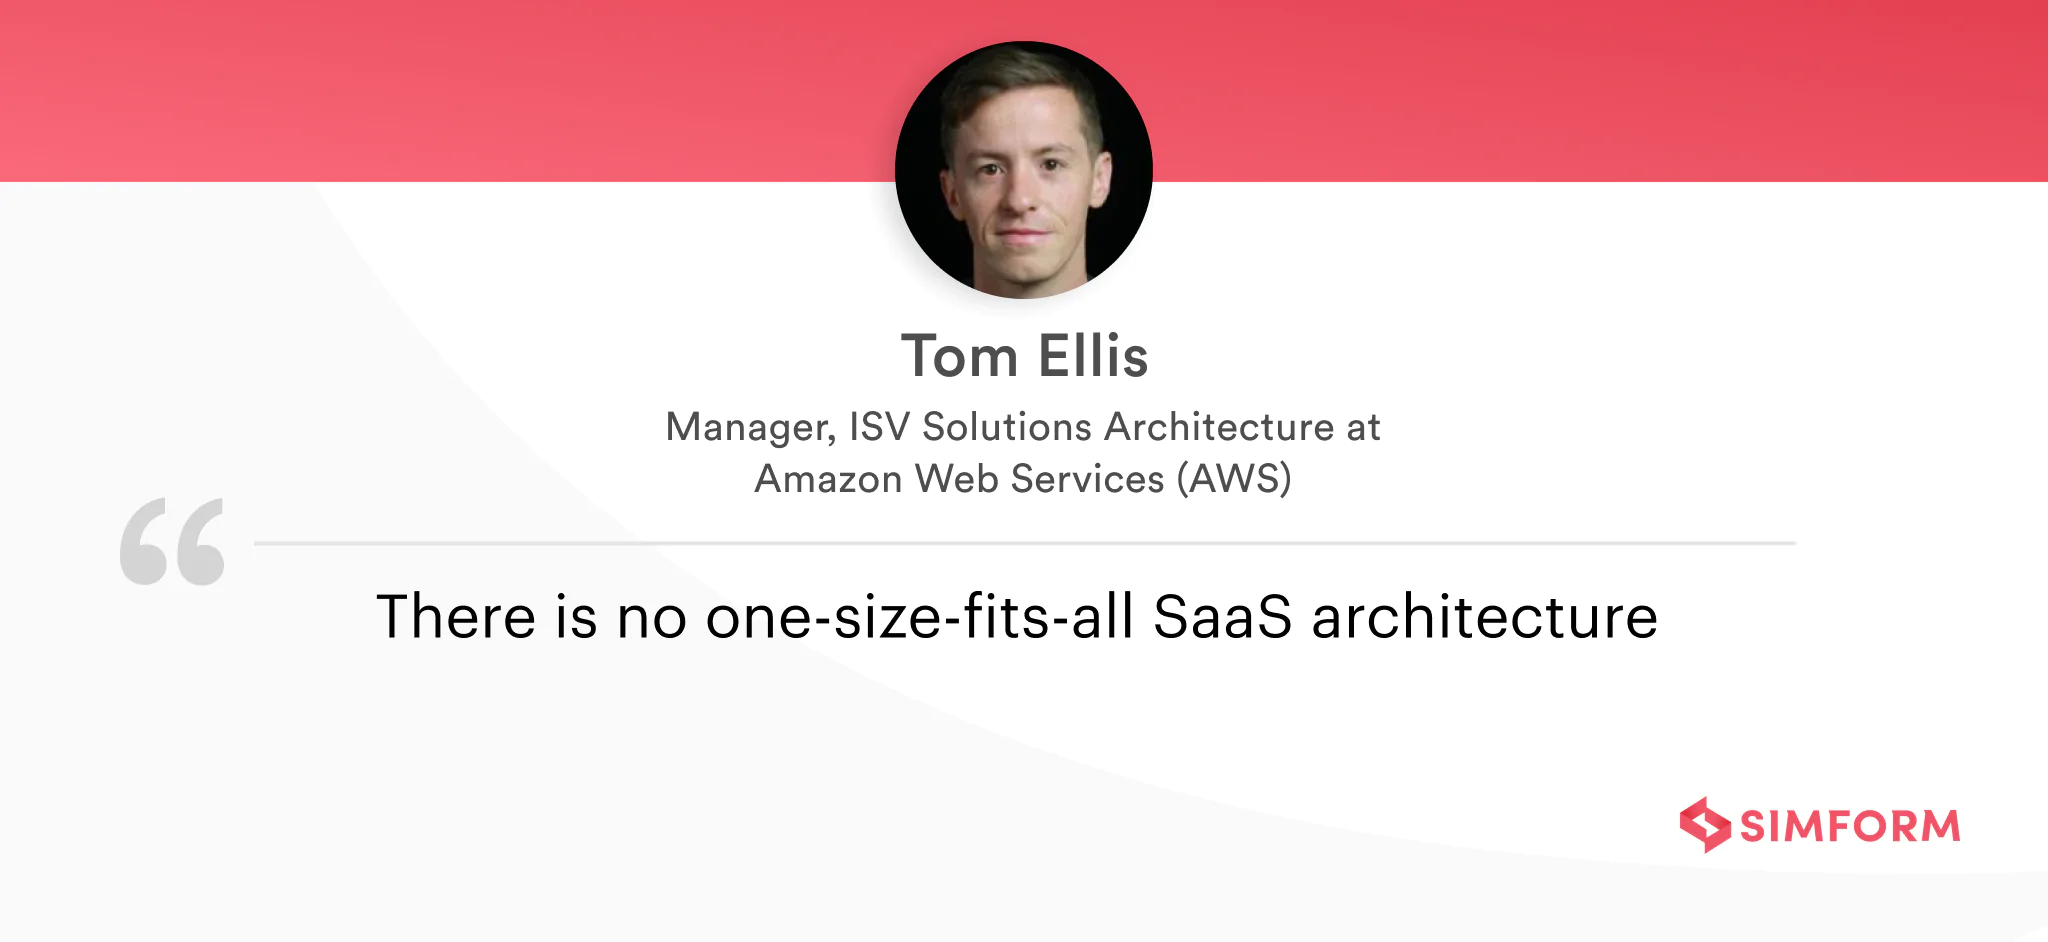 Types of SaaS architecture